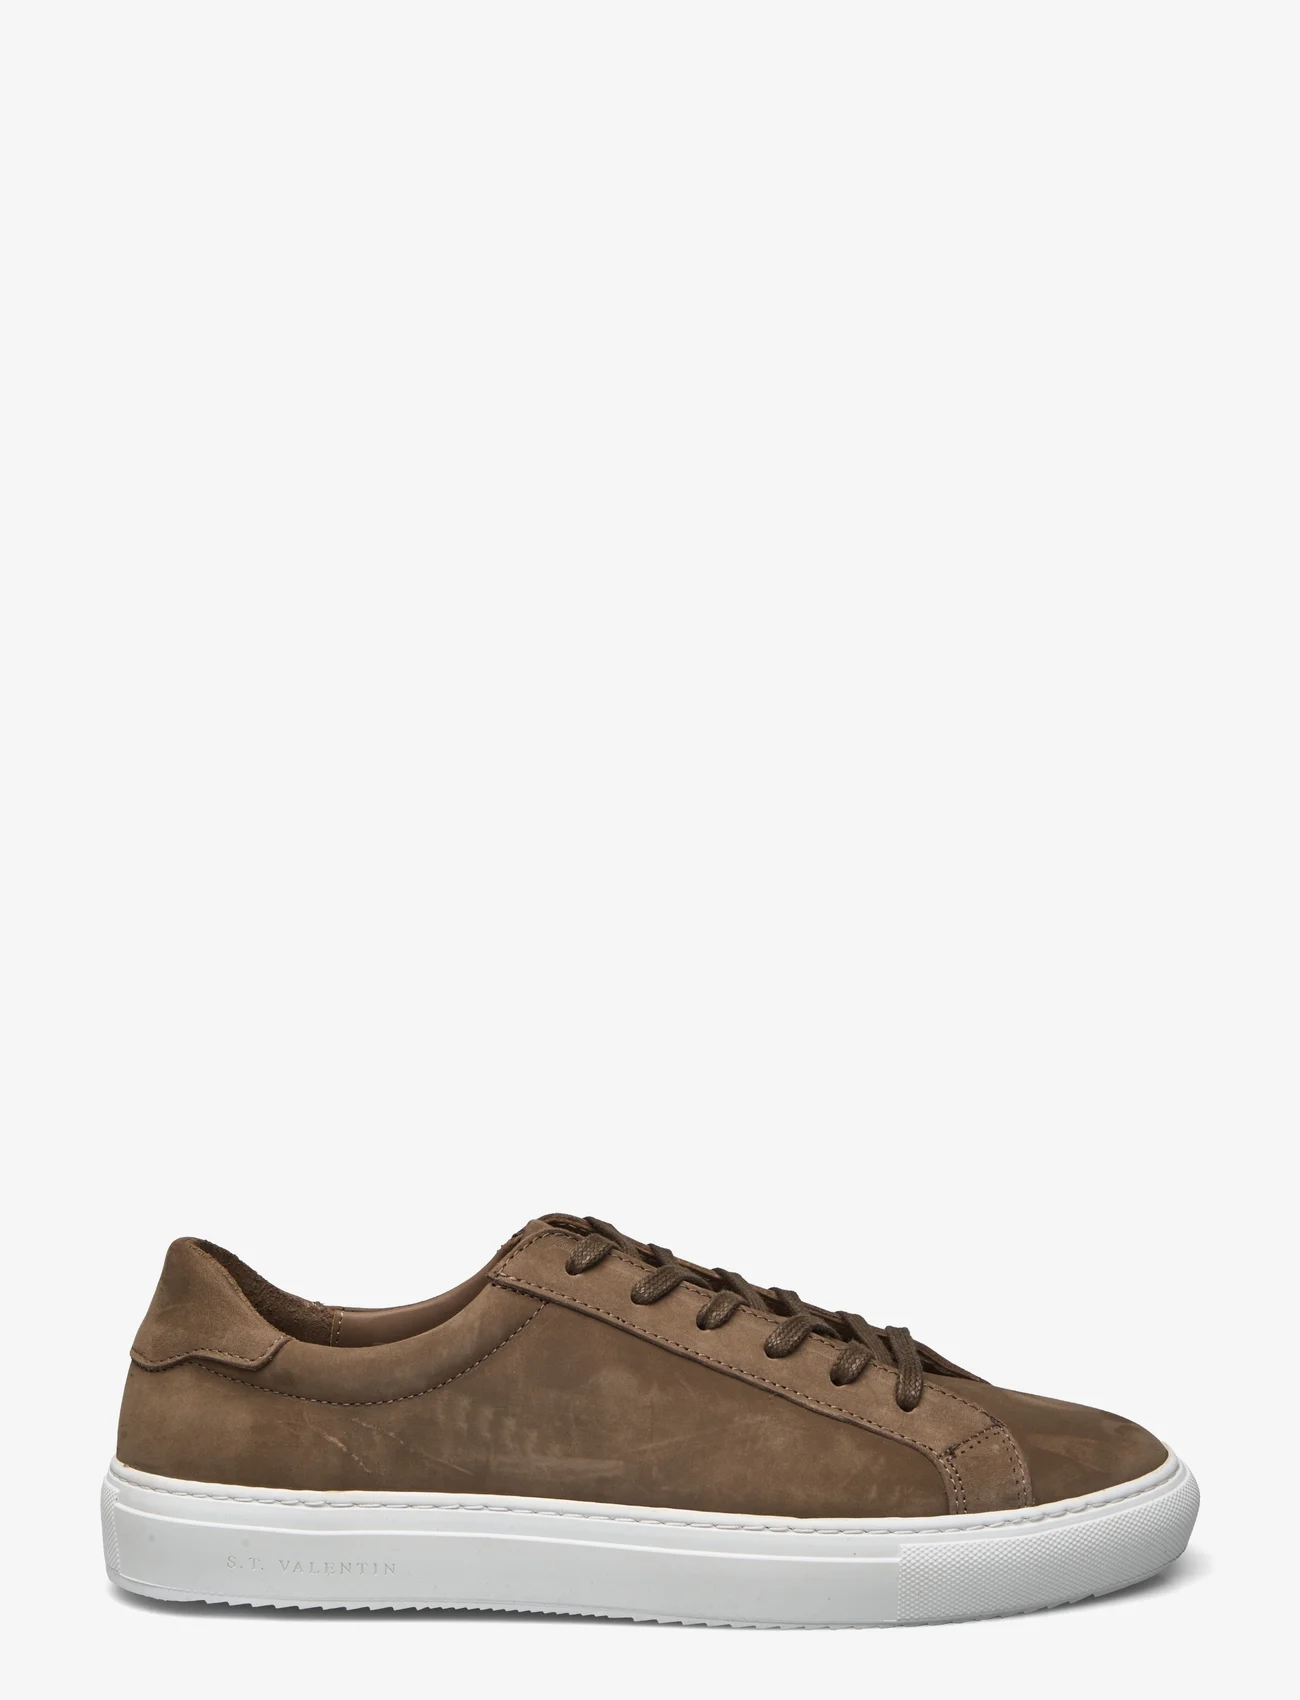 S.T. VALENTIN - Classic Sneaker -Grained leather - niedriger schnitt - taupe - 1